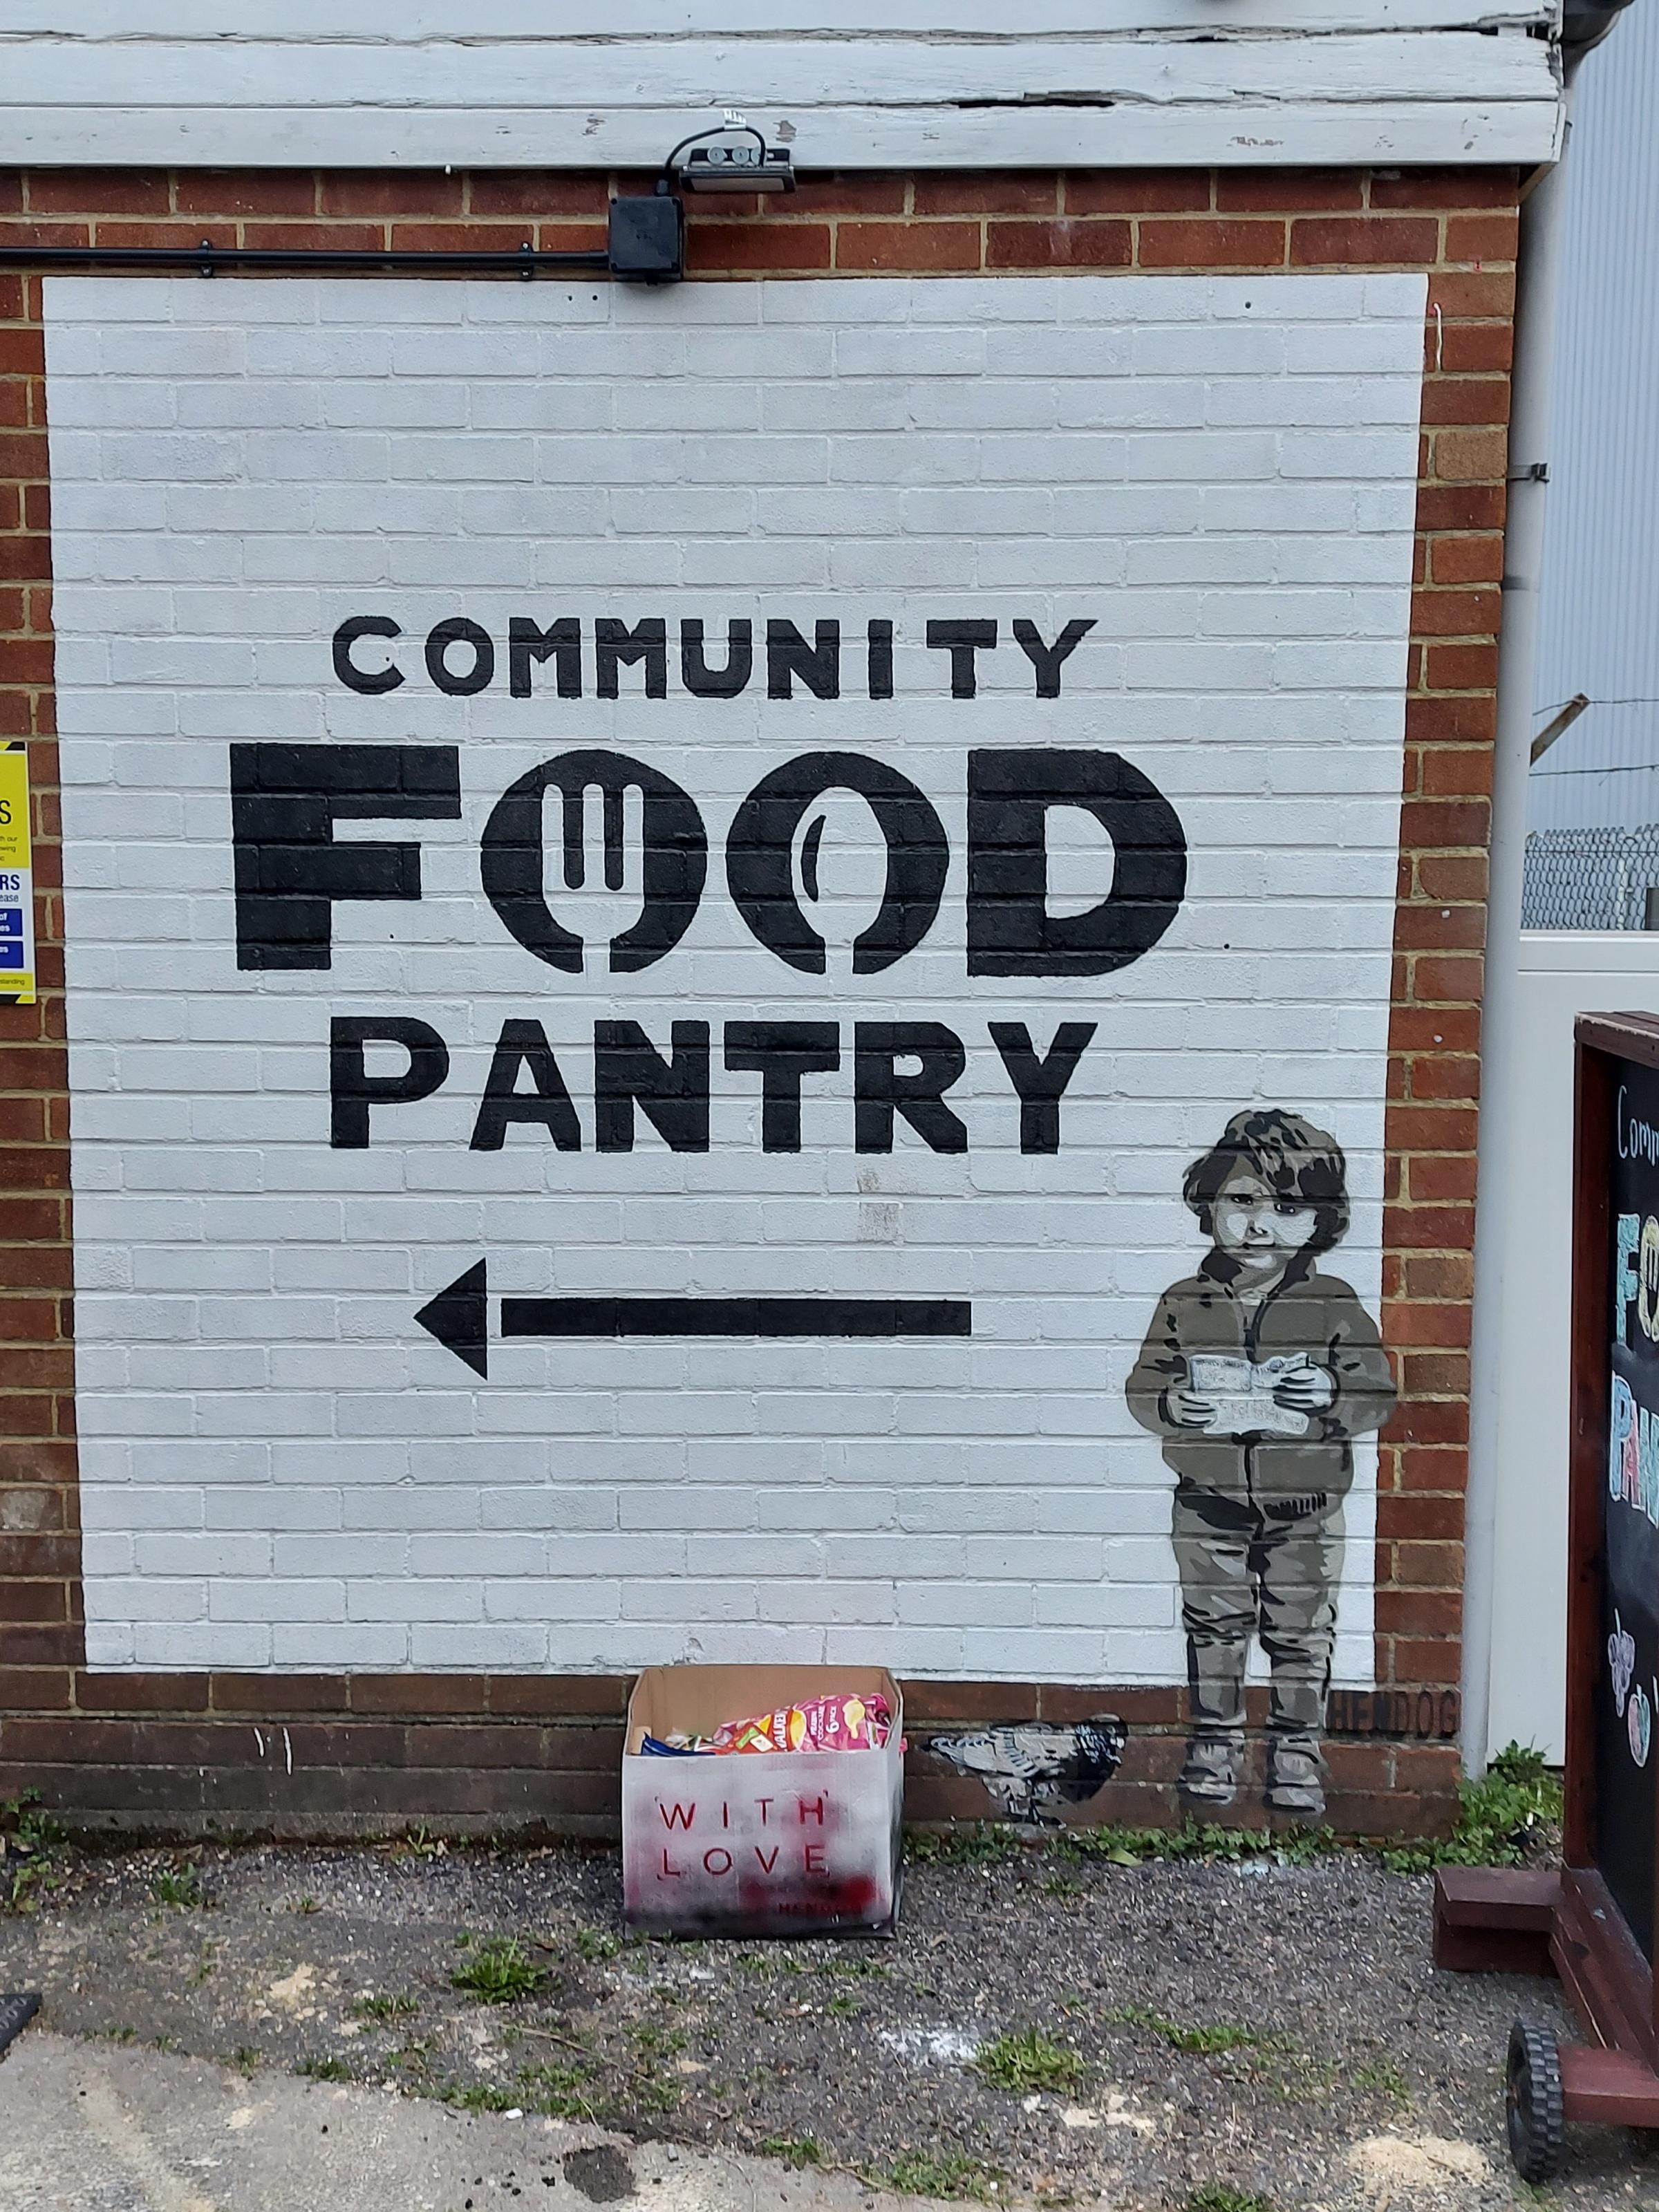 The Banksy-style artwork at the Community Food Pantry